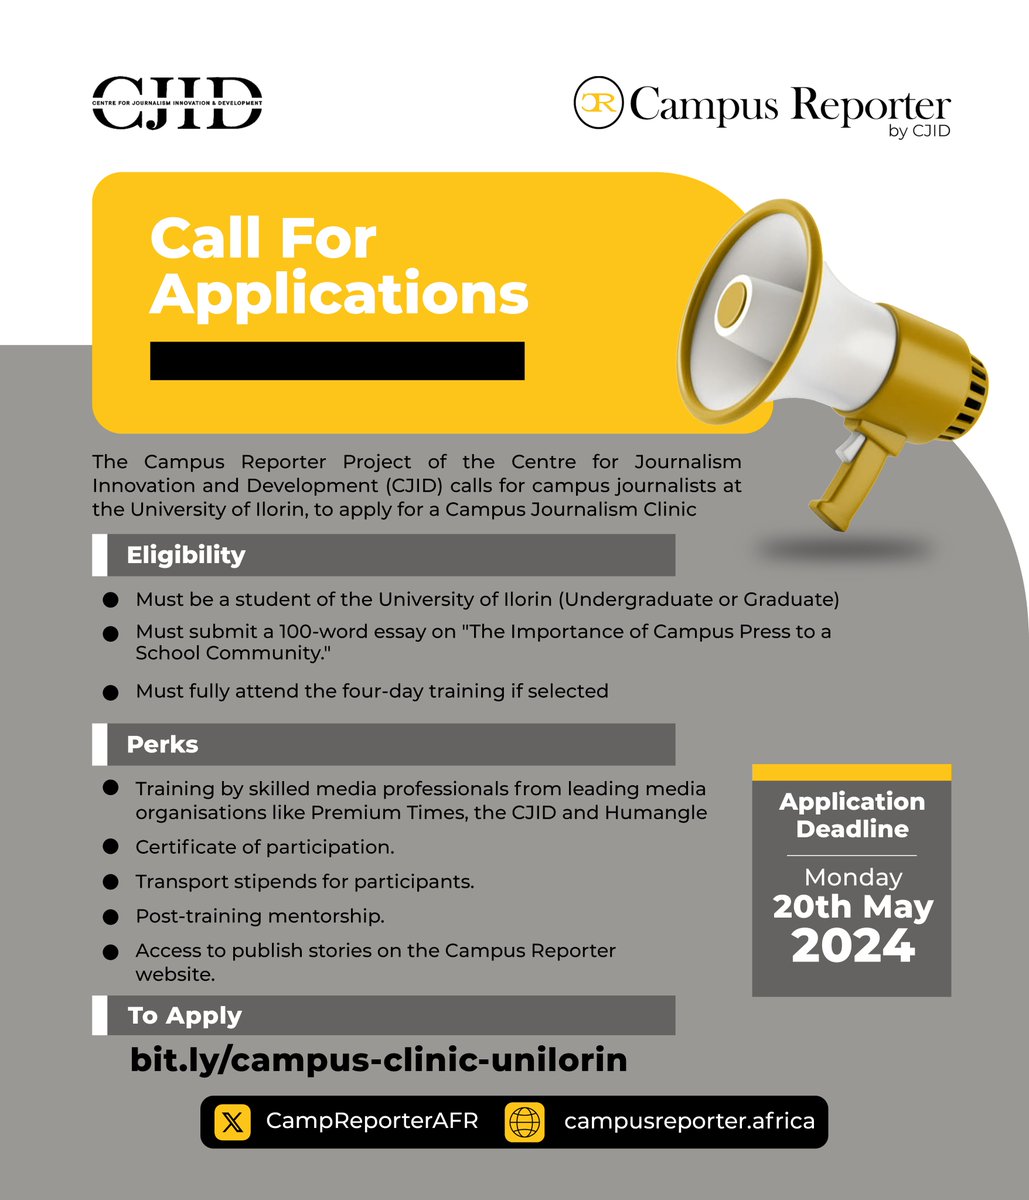 Are you a student of @UnilorinNGR? We are bringing a campus journalism training to your institution in June. Check the flyer for more details. Applications close in one week: forms.gle/MRYCsXHyLn2qwf…